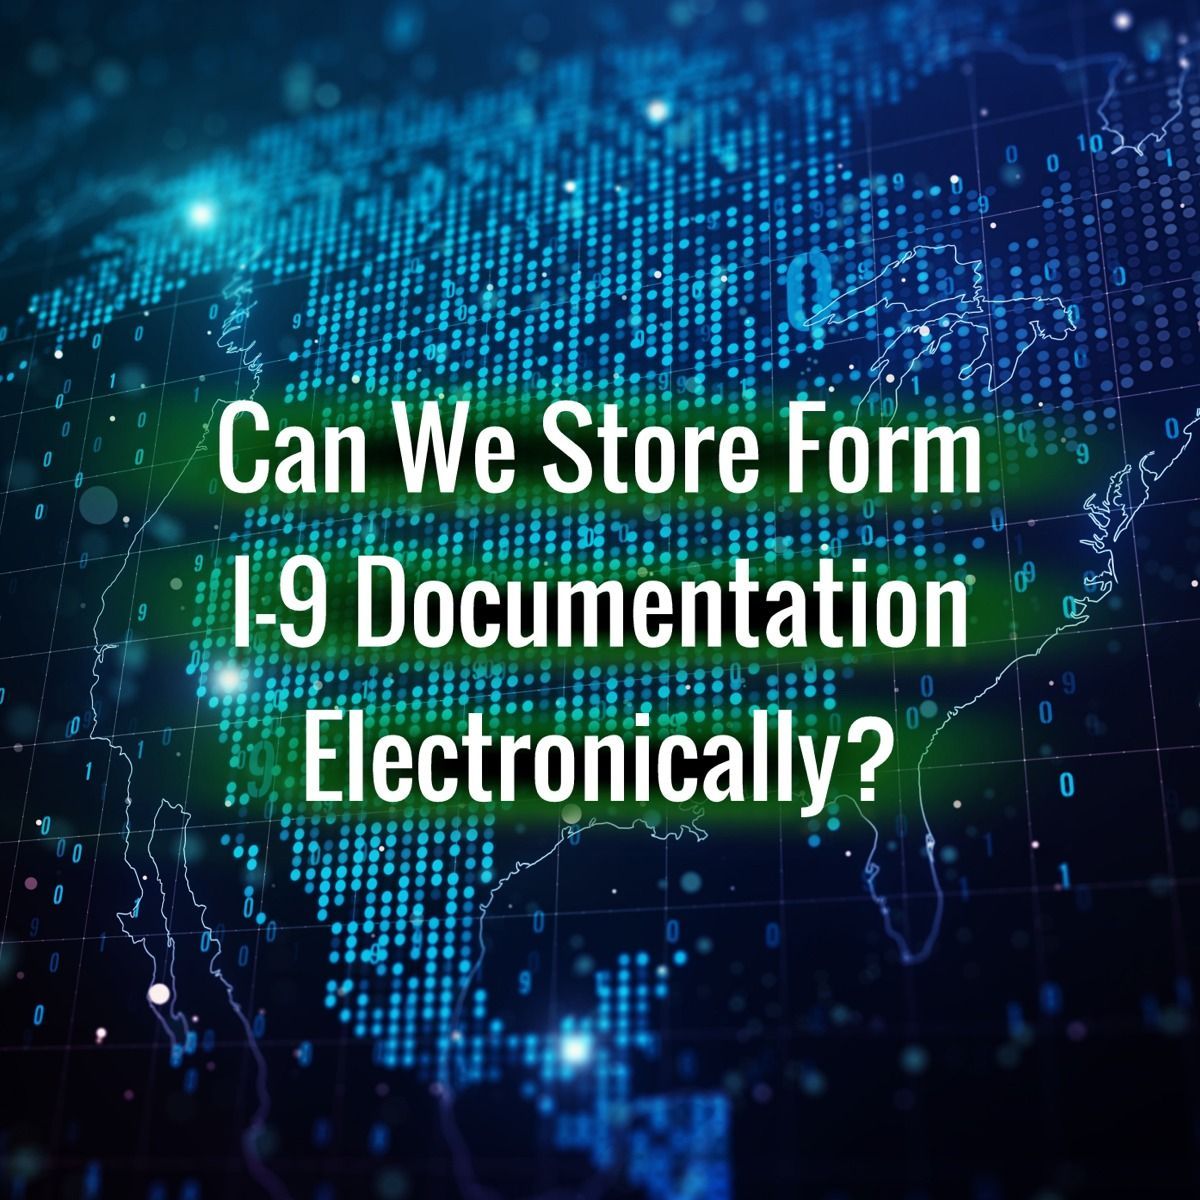 Can We Store Form I-9 Documentation Electronically?